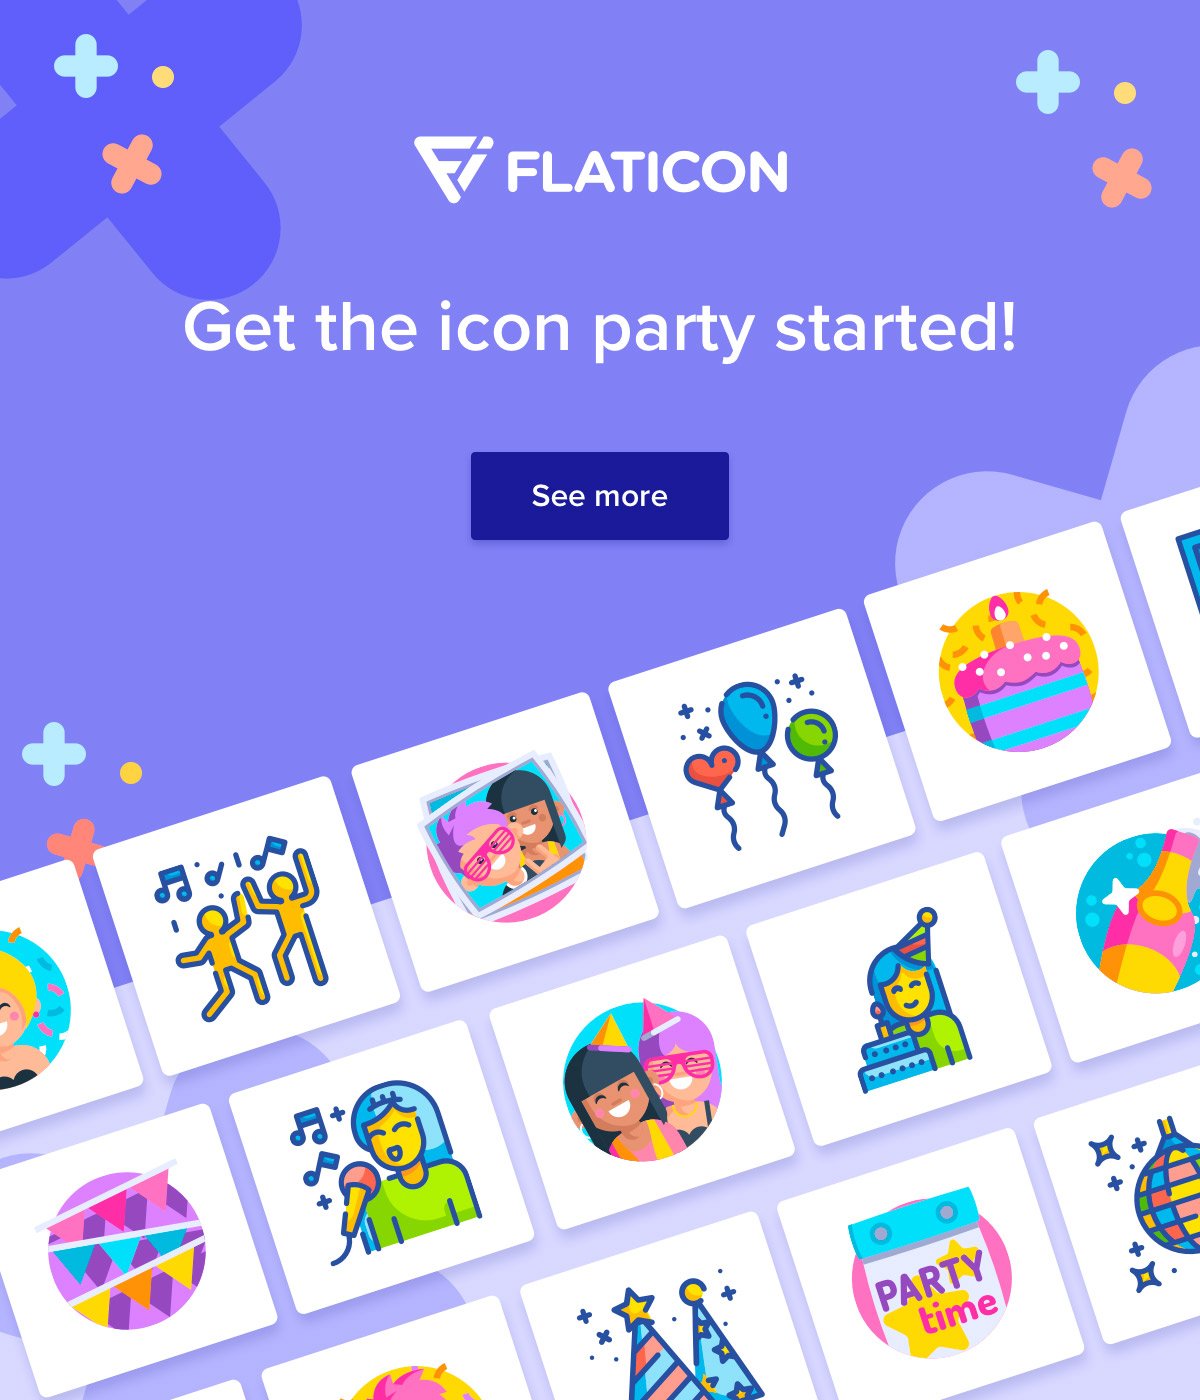 Get the icon party started!